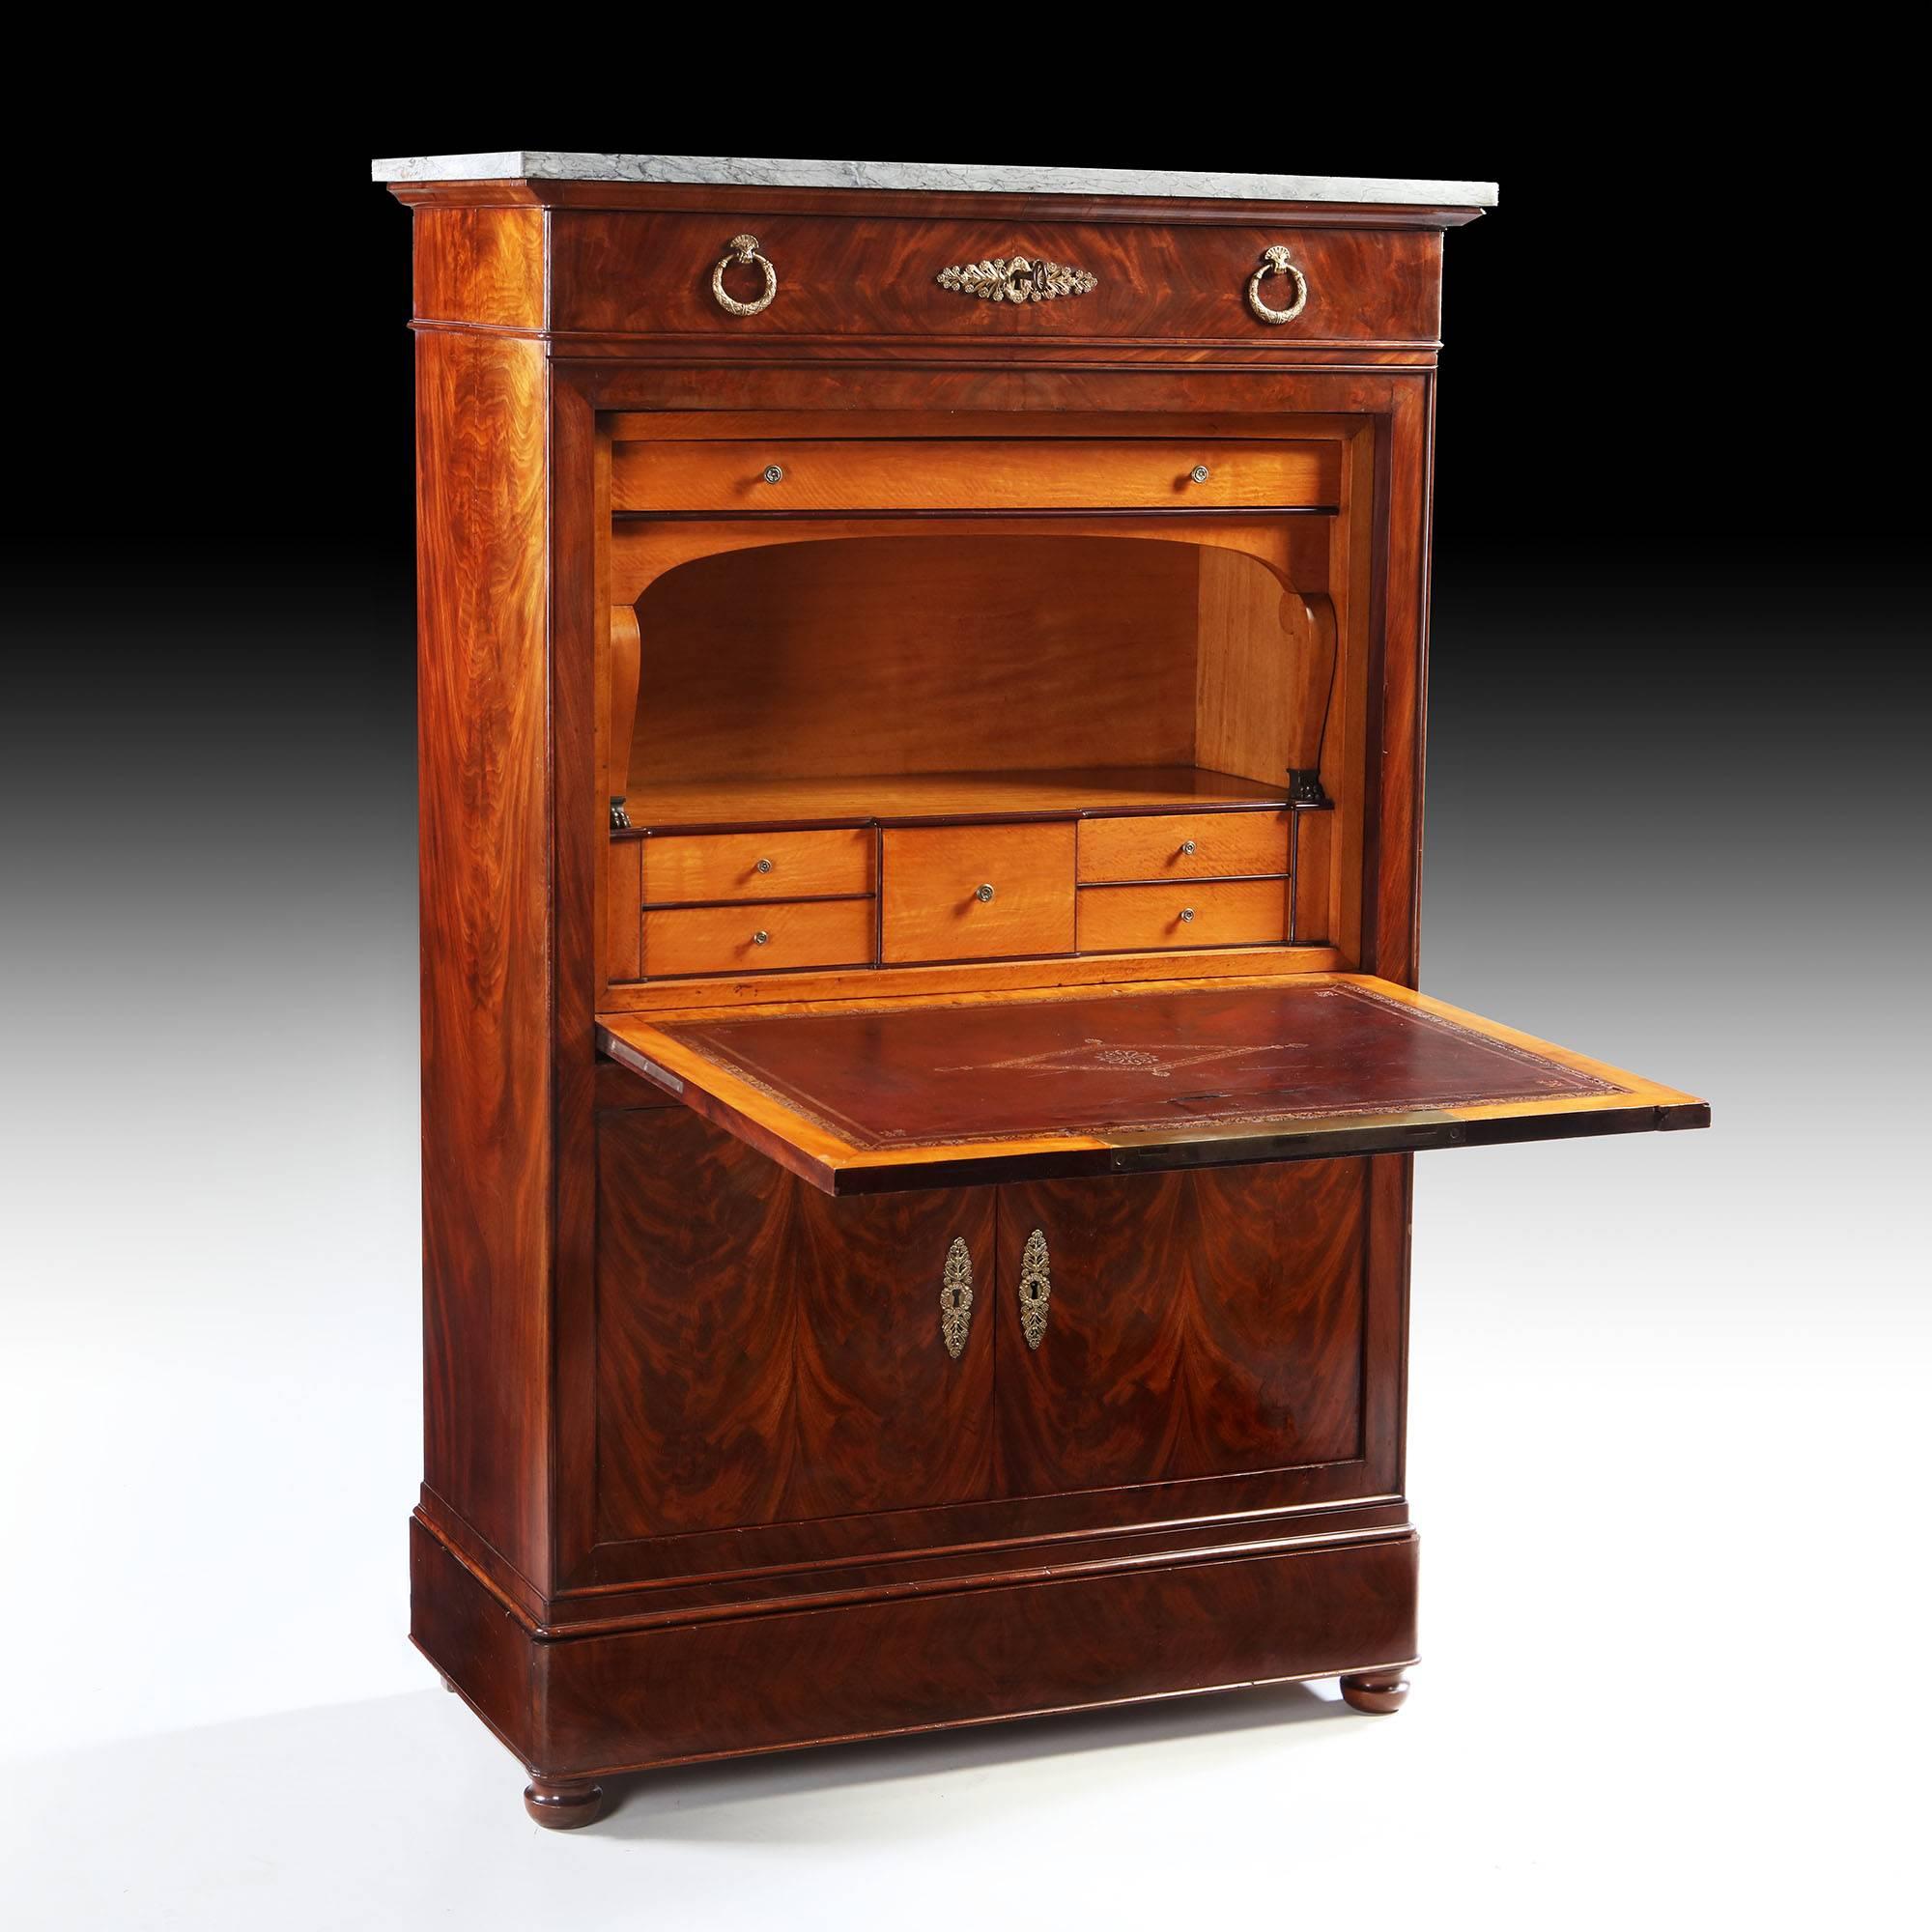 A fine early 19th century flame mahogany secretaire a abattant with ormolu mounts, the upper body with satinwood interior, original red leather and gilt tooled writing surface, and a drawer to the frieze, all surmounted by original veined marble